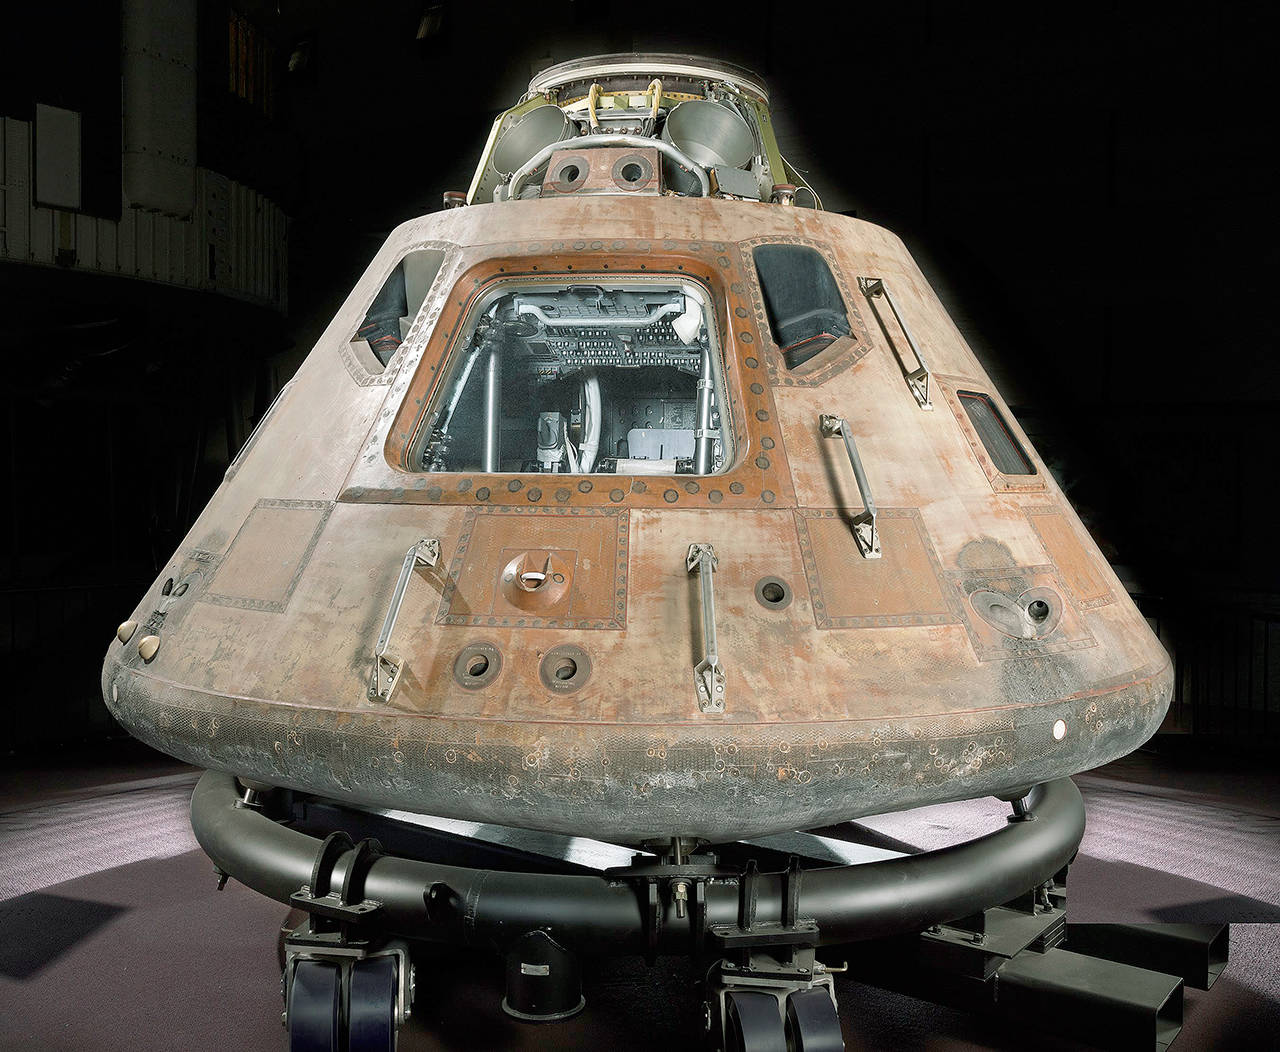 The Apollo 11 command module Columbia on temporary cradle. Photo by Eric Long, National Air and Space Museum, Smithsonian Institution